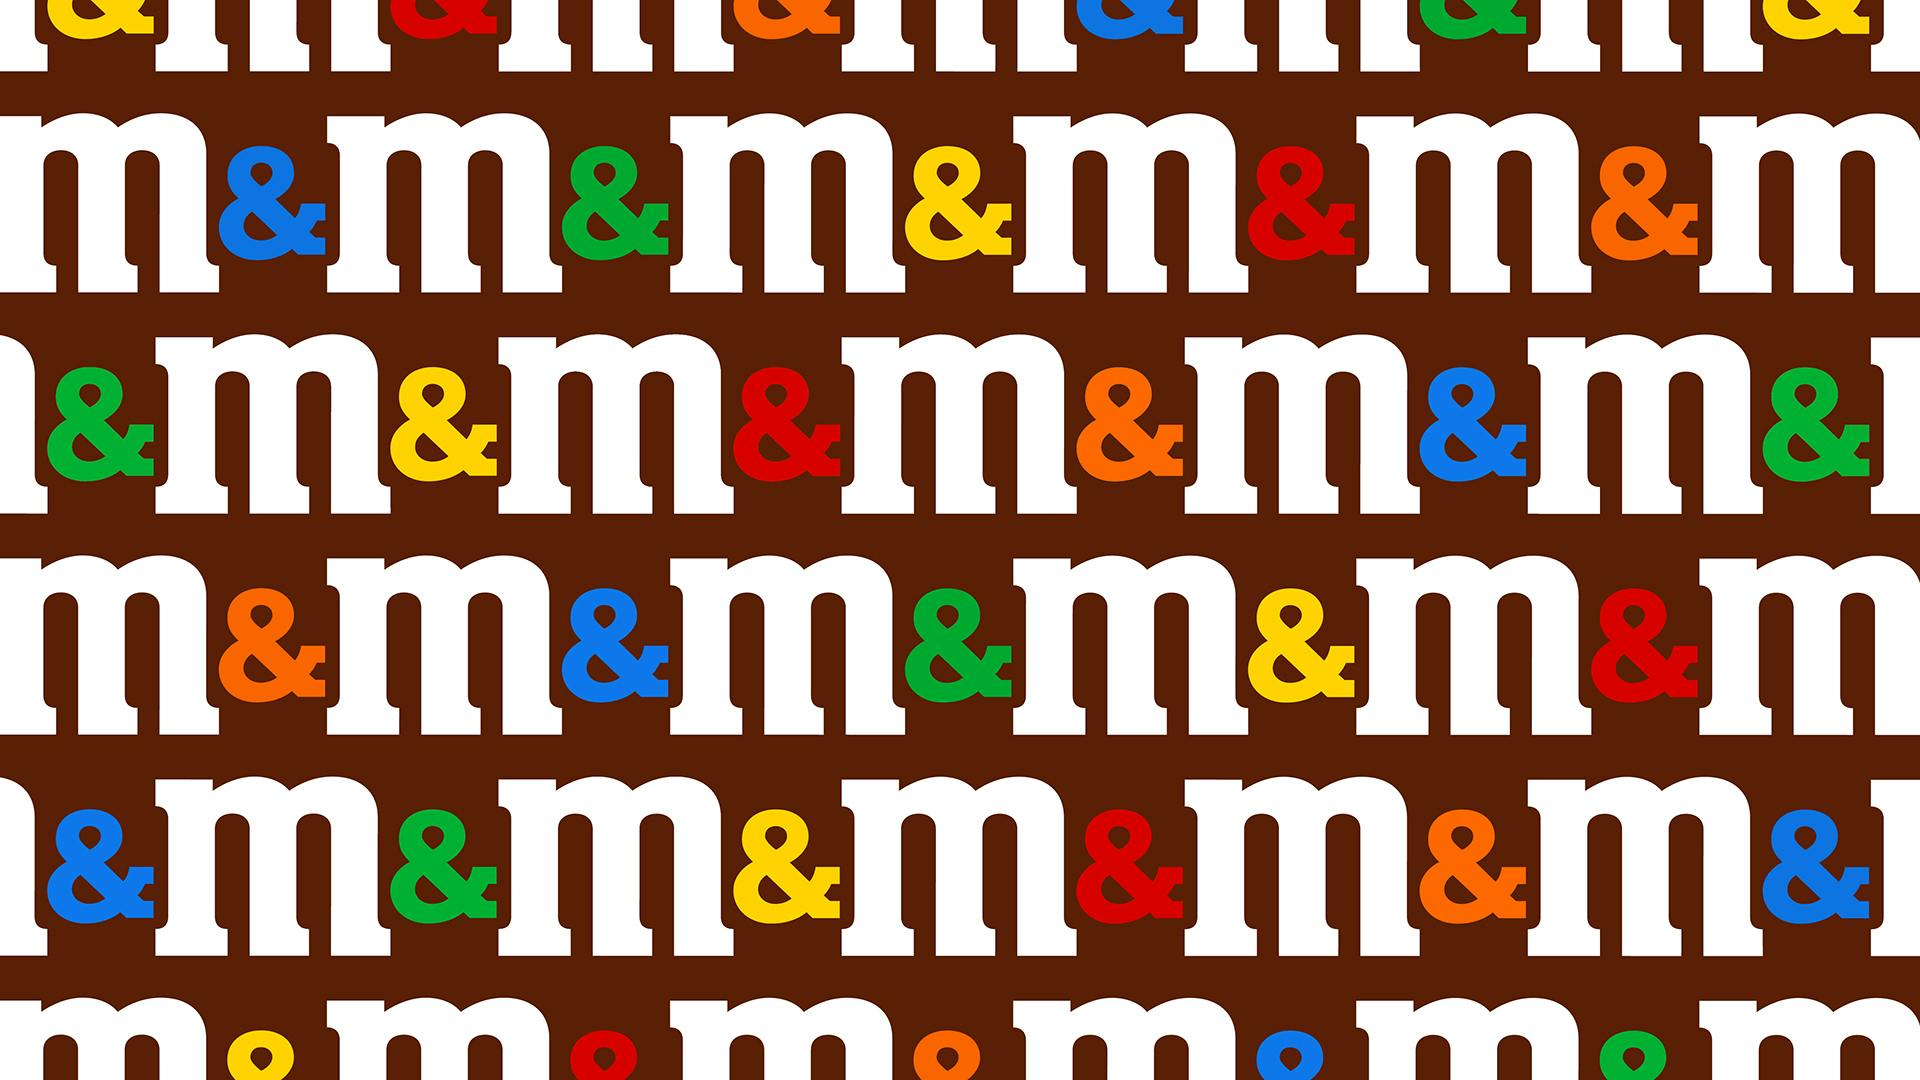 Repeated M&M's logo by JKR